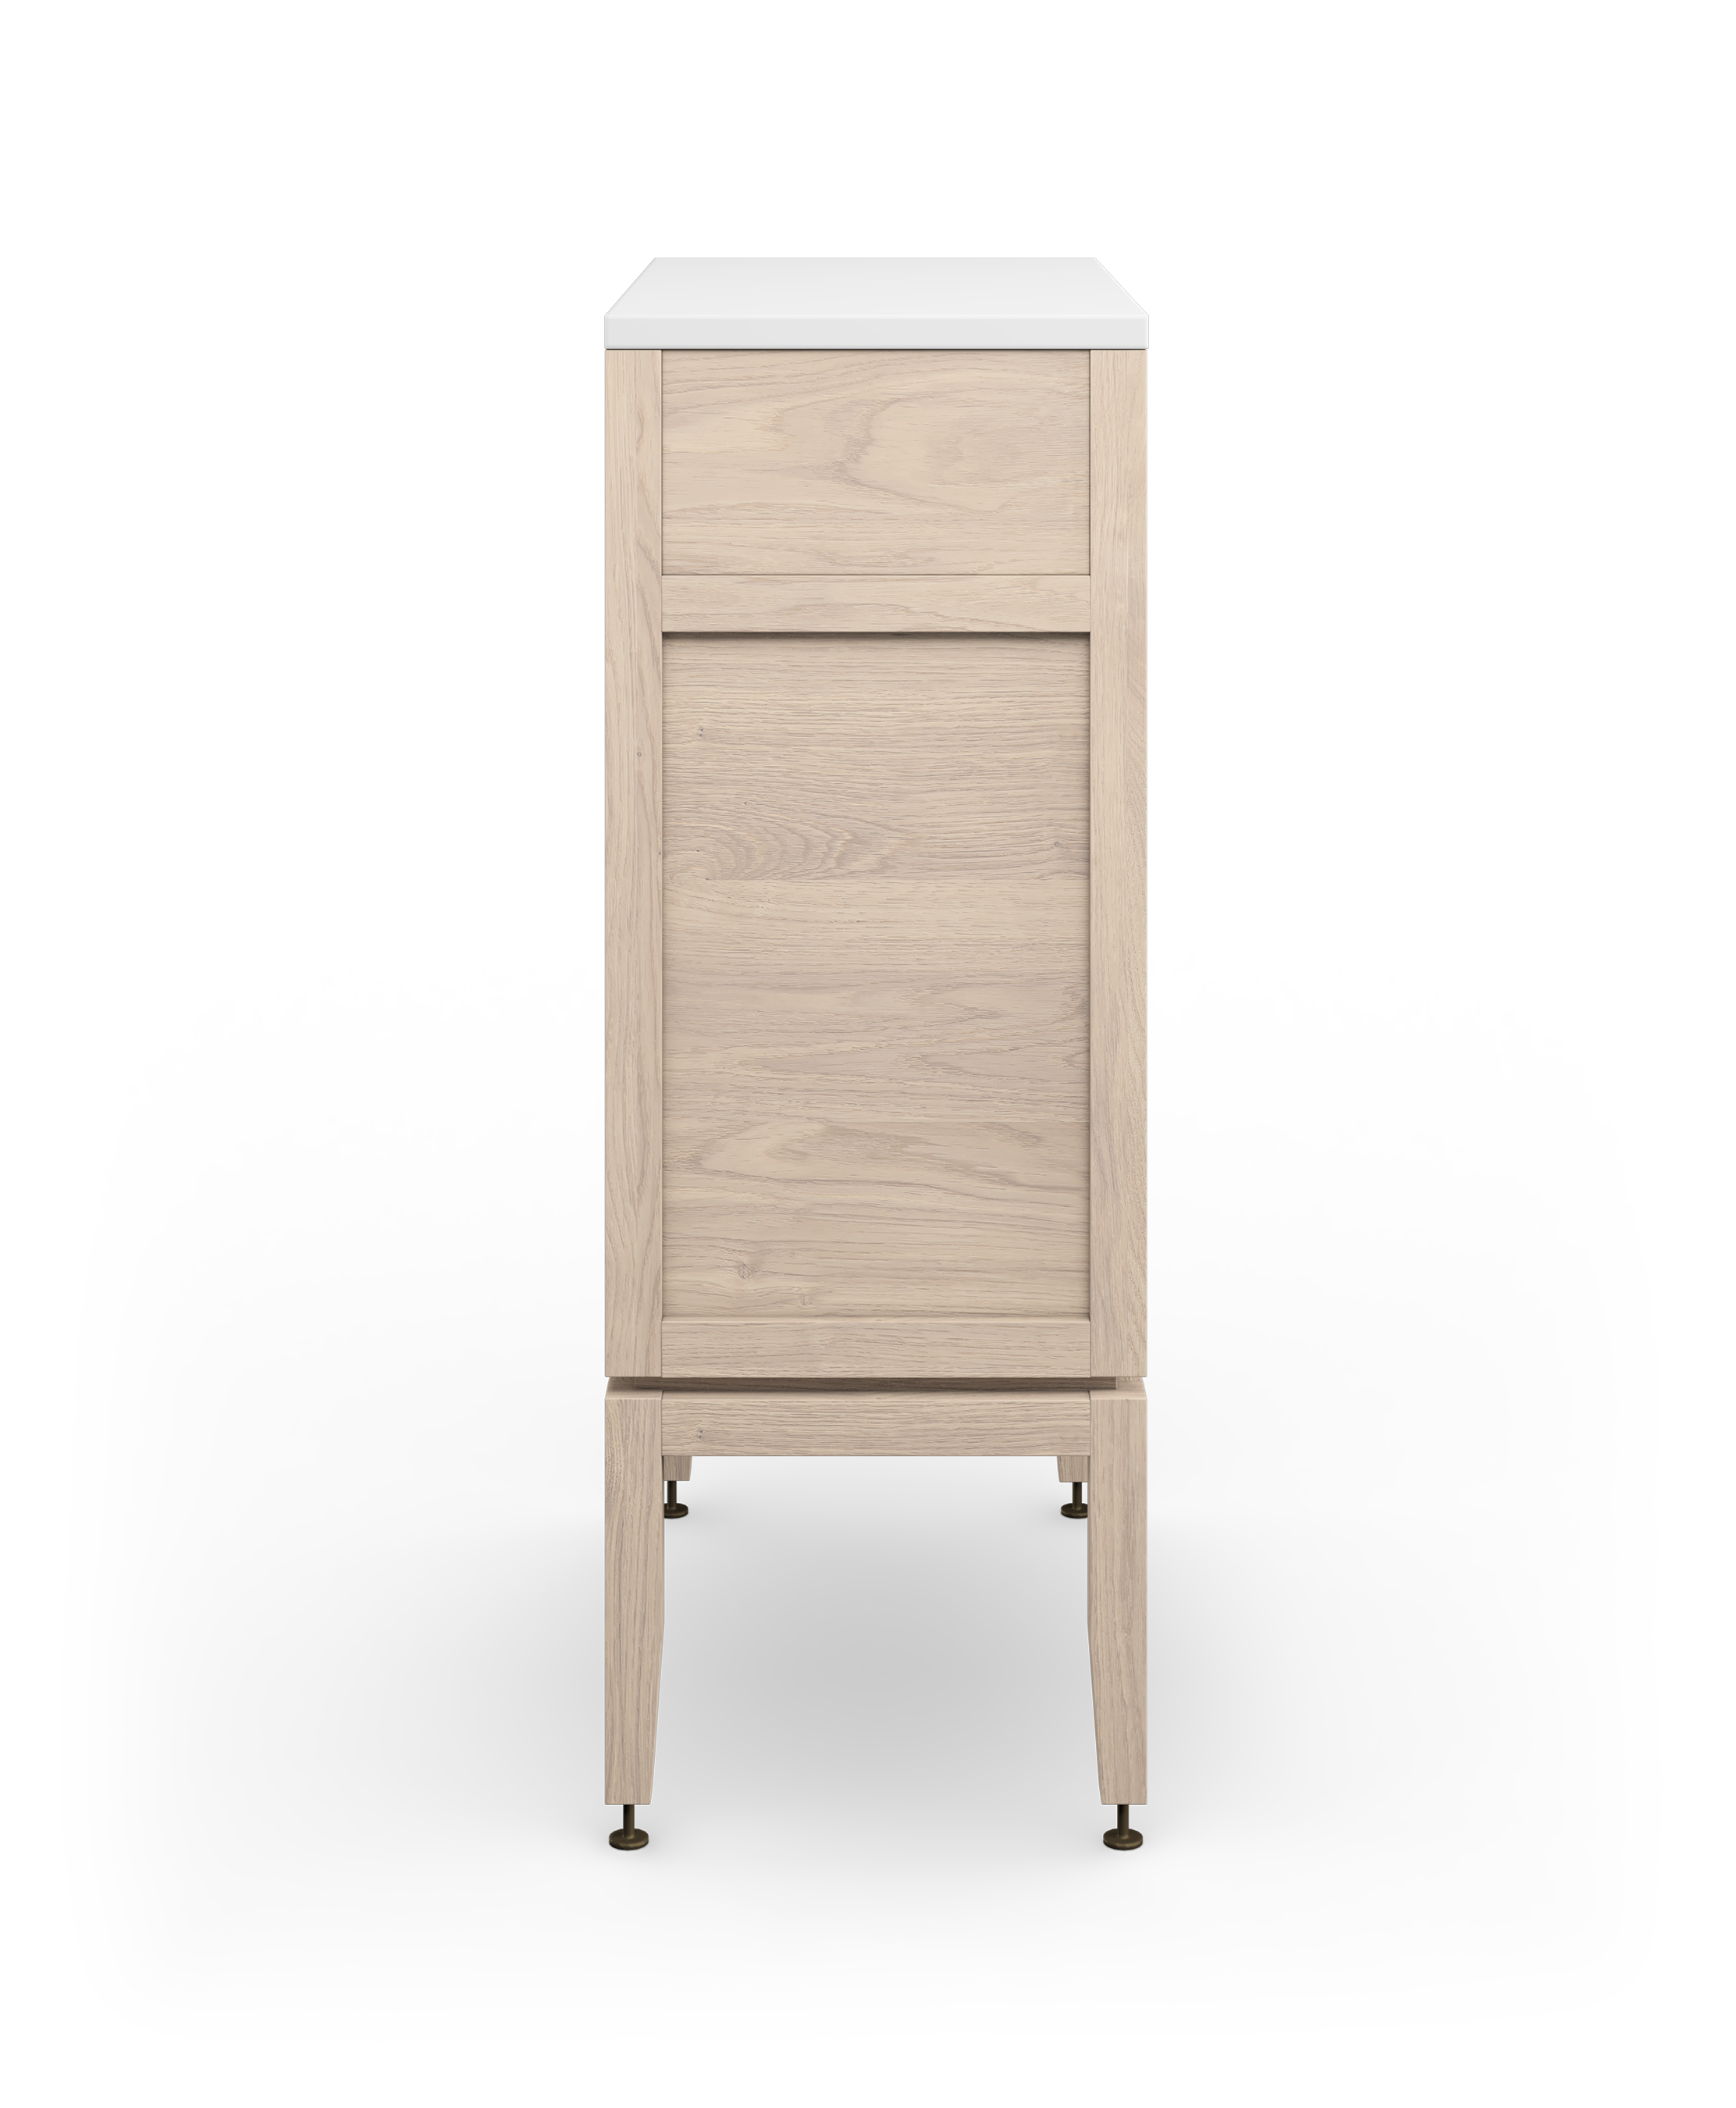 Coquo modular bathroom vanity with one drawer + one door in white stained oak. 